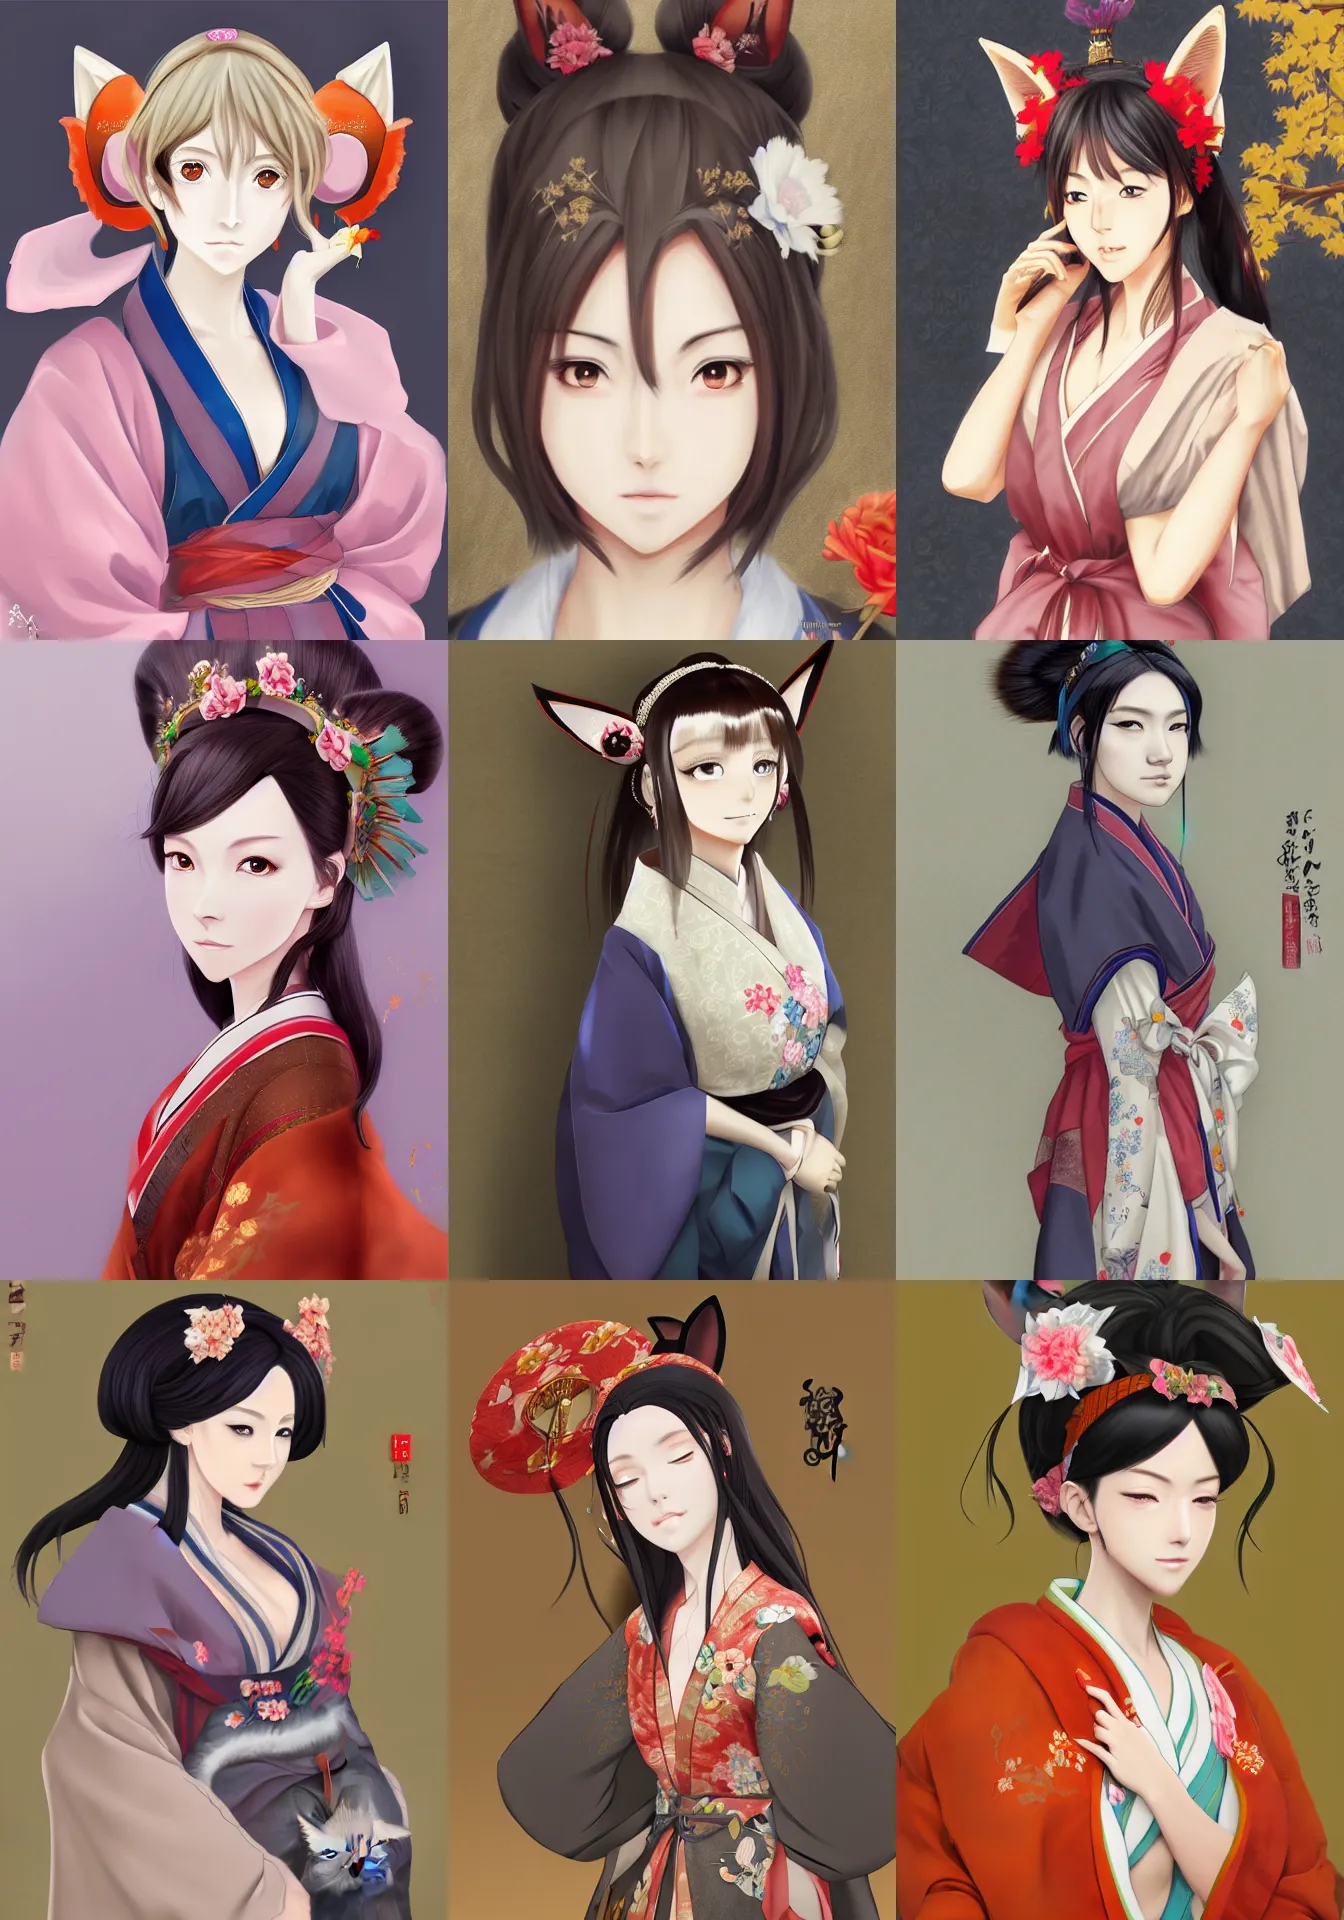 Prompt: A realistic anime portrait of a shapely noblewoman with fox ears wearing a kimono, digital painting, by Dao Trong Le, digtial painting, trending on ArtStation, deviantart, SFW version